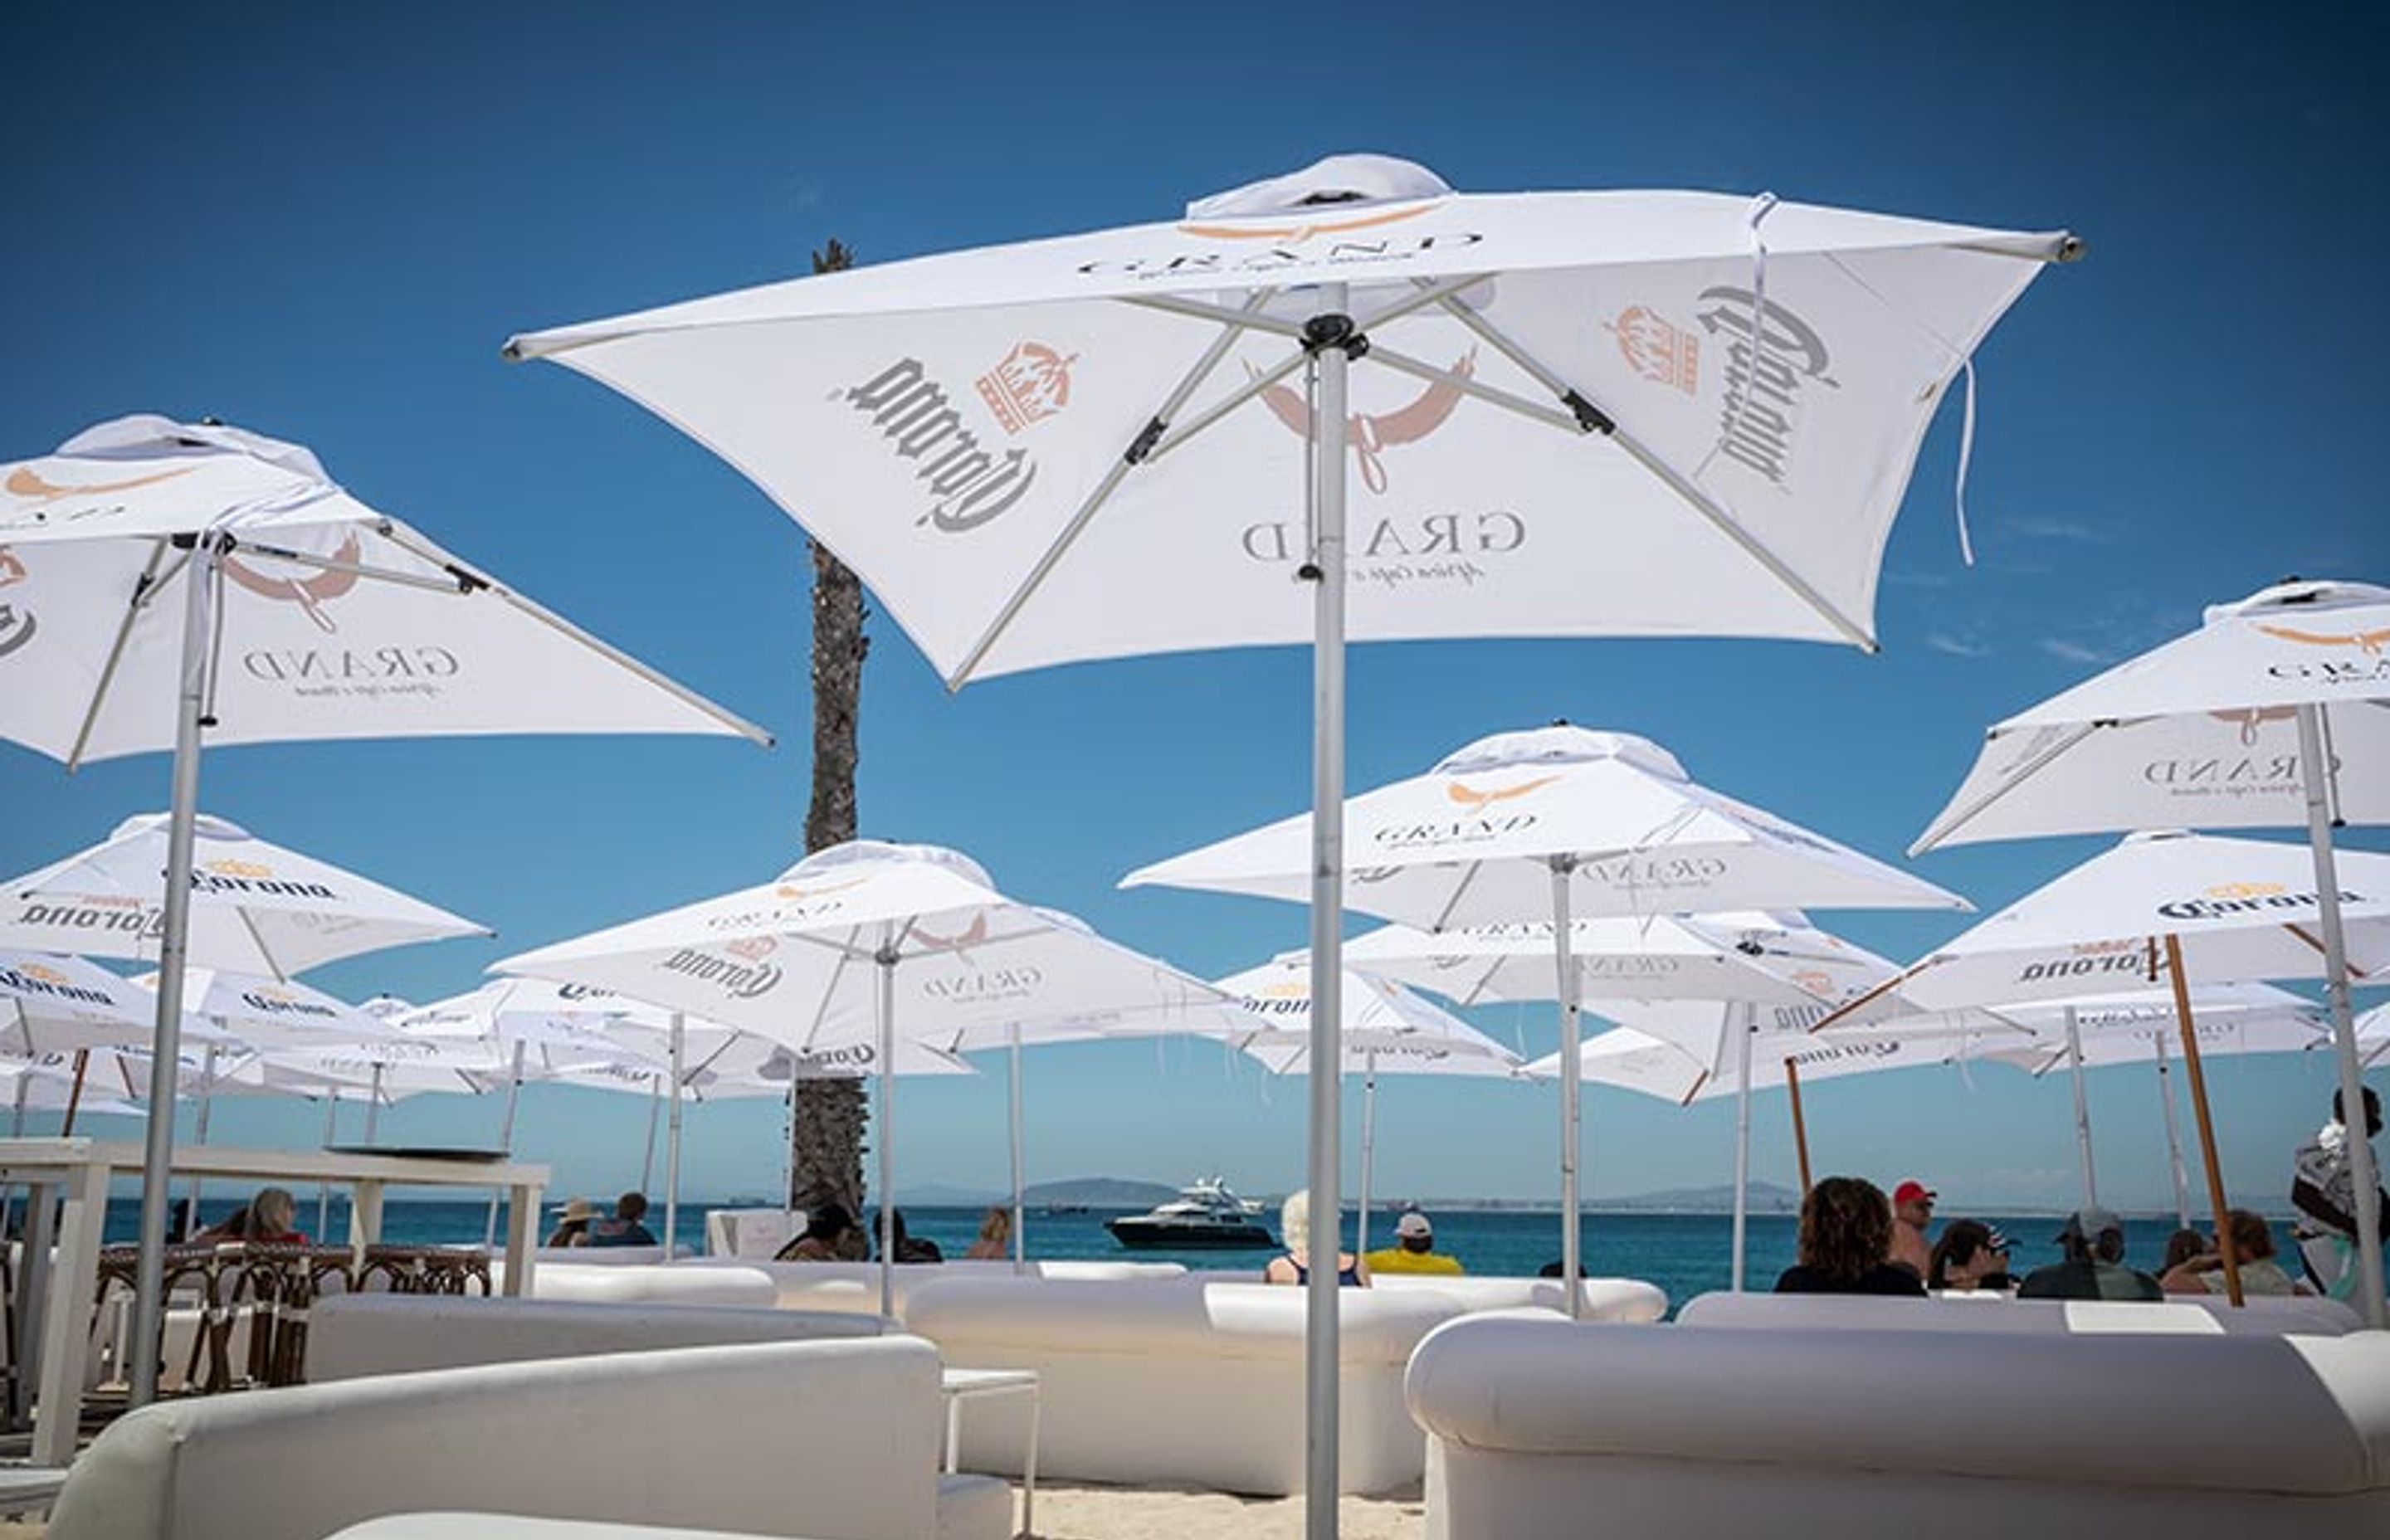 What to know about branded shade umbrellas for your next event